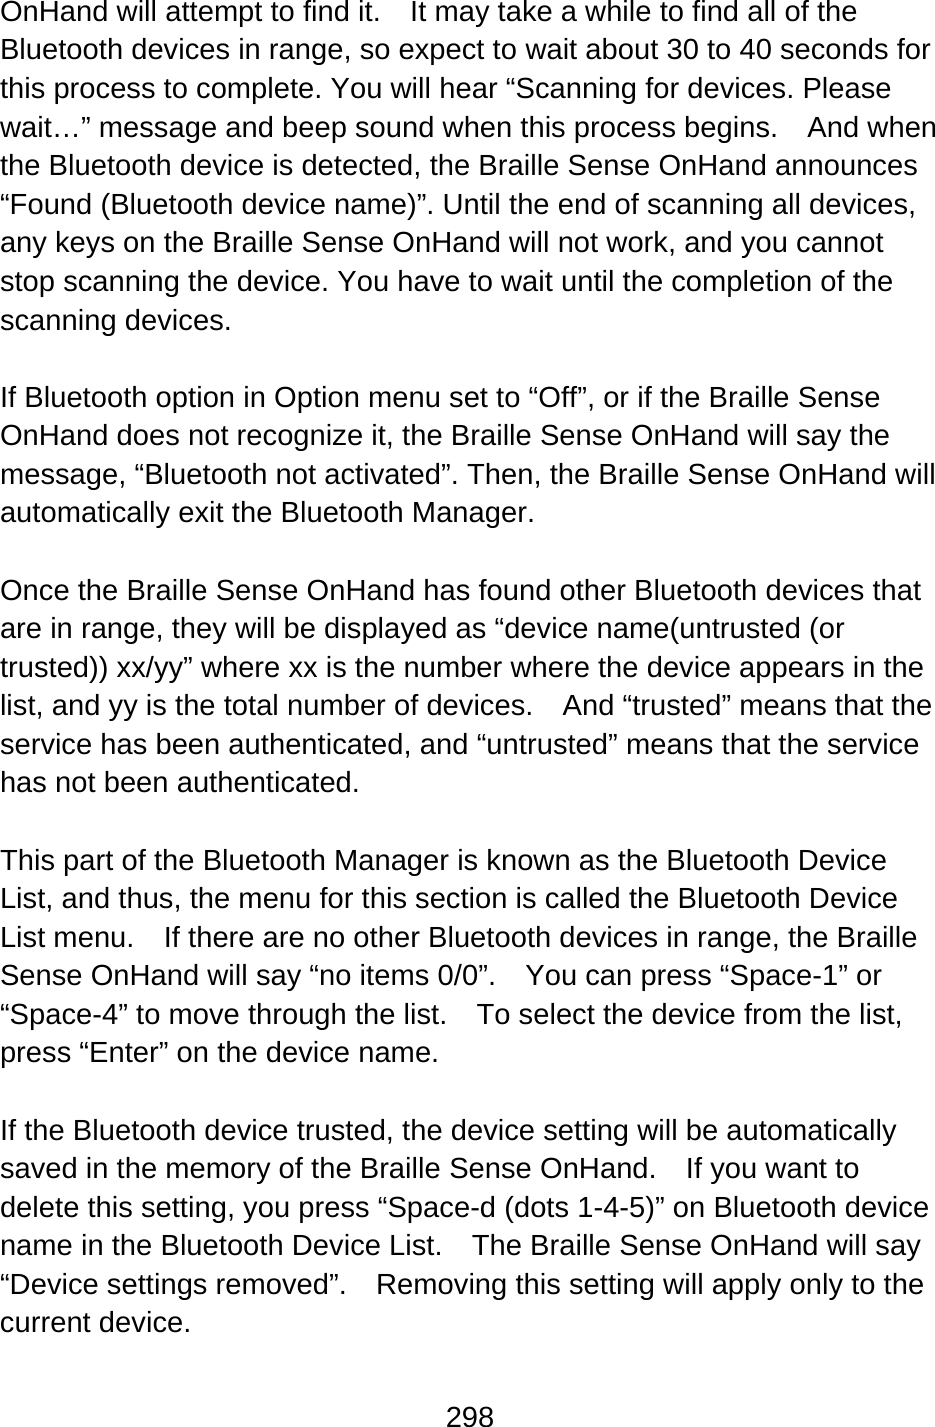 298  OnHand will attempt to find it.    It may take a while to find all of the Bluetooth devices in range, so expect to wait about 30 to 40 seconds for this process to complete. You will hear “Scanning for devices. Please wait…” message and beep sound when this process begins.    And when the Bluetooth device is detected, the Braille Sense OnHand announces “Found (Bluetooth device name)”. Until the end of scanning all devices, any keys on the Braille Sense OnHand will not work, and you cannot stop scanning the device. You have to wait until the completion of the scanning devices.  If Bluetooth option in Option menu set to “Off”, or if the Braille Sense OnHand does not recognize it, the Braille Sense OnHand will say the message, “Bluetooth not activated”. Then, the Braille Sense OnHand will automatically exit the Bluetooth Manager.  Once the Braille Sense OnHand has found other Bluetooth devices that are in range, they will be displayed as “device name(untrusted (or trusted)) xx/yy” where xx is the number where the device appears in the list, and yy is the total number of devices.    And “trusted” means that the service has been authenticated, and “untrusted” means that the service has not been authenticated.  This part of the Bluetooth Manager is known as the Bluetooth Device List, and thus, the menu for this section is called the Bluetooth Device List menu.    If there are no other Bluetooth devices in range, the Braille Sense OnHand will say “no items 0/0”.  You can press “Space-1” or “Space-4” to move through the list.    To select the device from the list, press “Enter” on the device name.  If the Bluetooth device trusted, the device setting will be automatically saved in the memory of the Braille Sense OnHand.    If you want to delete this setting, you press “Space-d (dots 1-4-5)” on Bluetooth device name in the Bluetooth Device List.    The Braille Sense OnHand will say “Device settings removed”.    Removing this setting will apply only to the current device.  